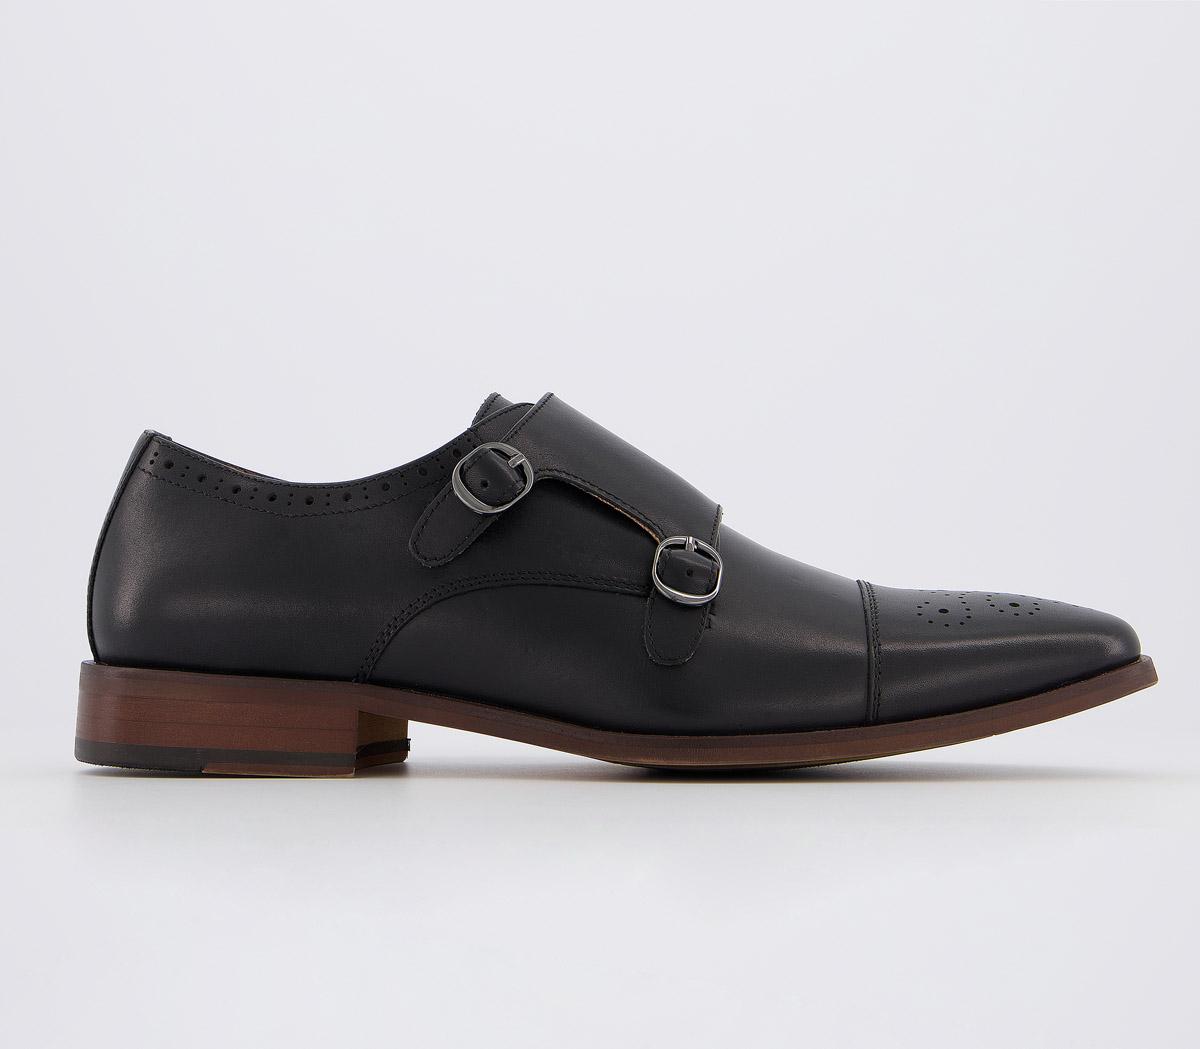 OFFICEMarcus Monk ShoesBlack Leather